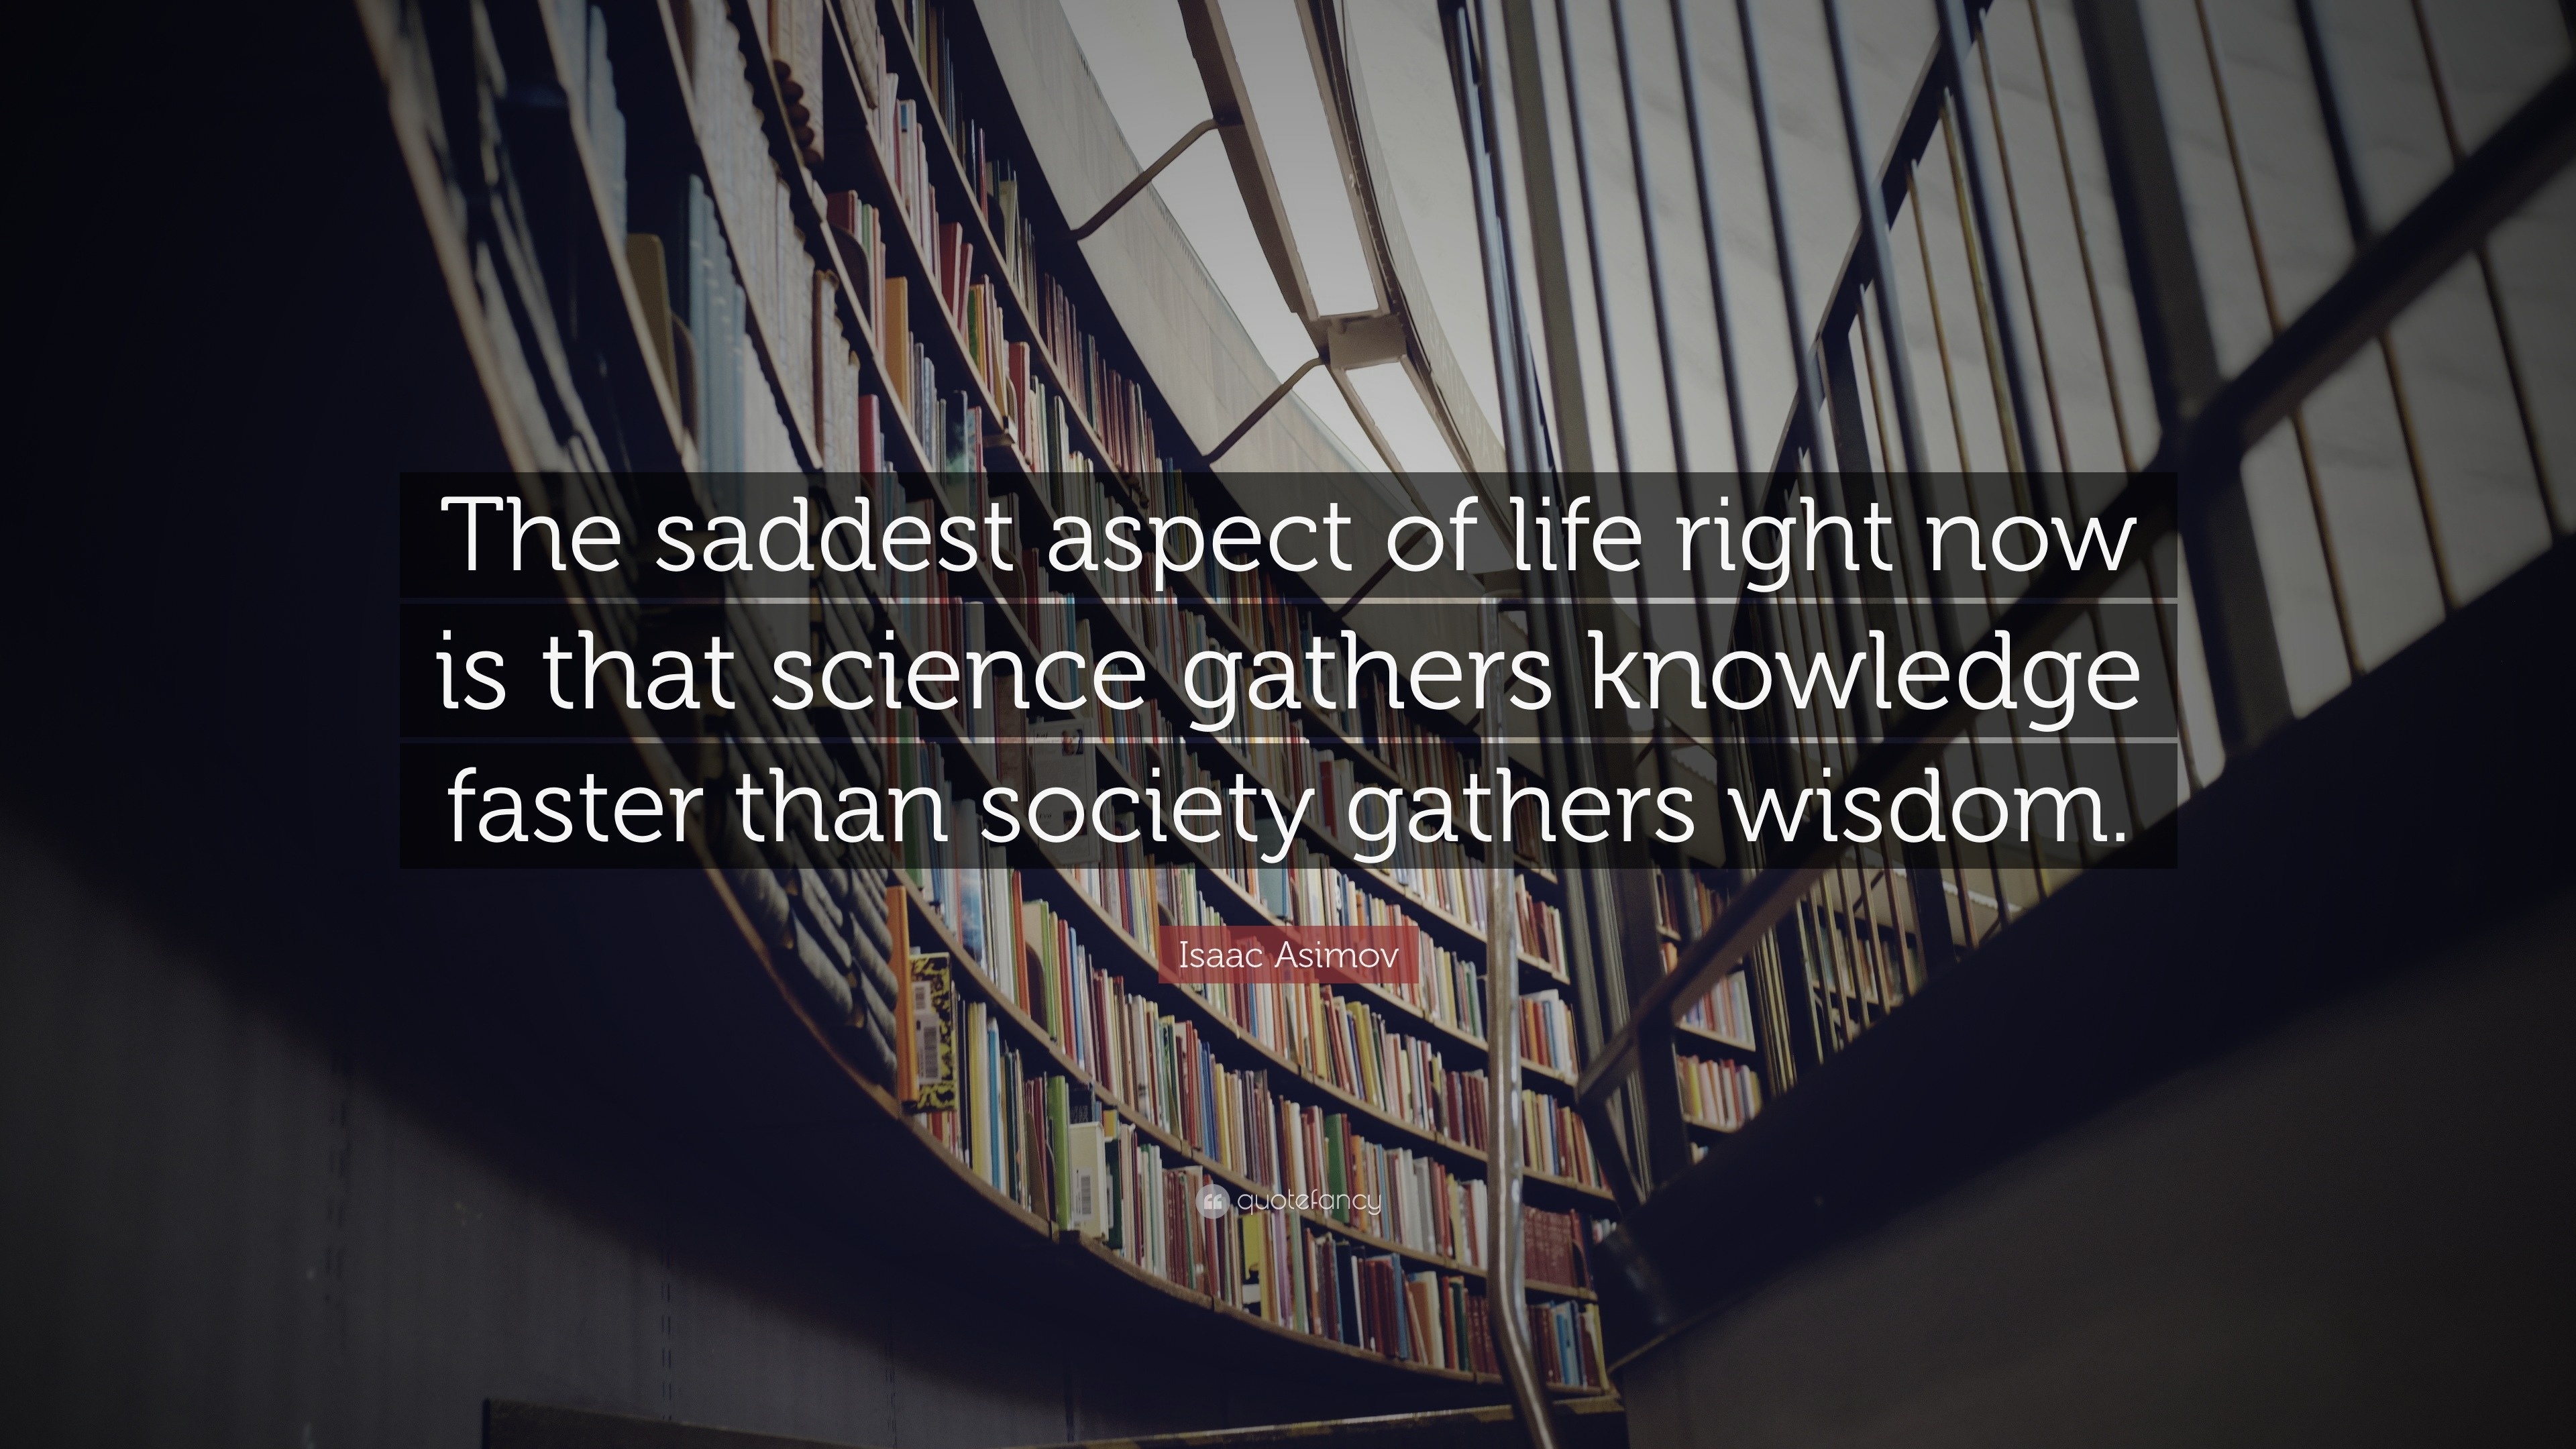 22103-Isaac-Asimov-Quote-The-saddest-aspect-of-life-right-now-is-that.jpg